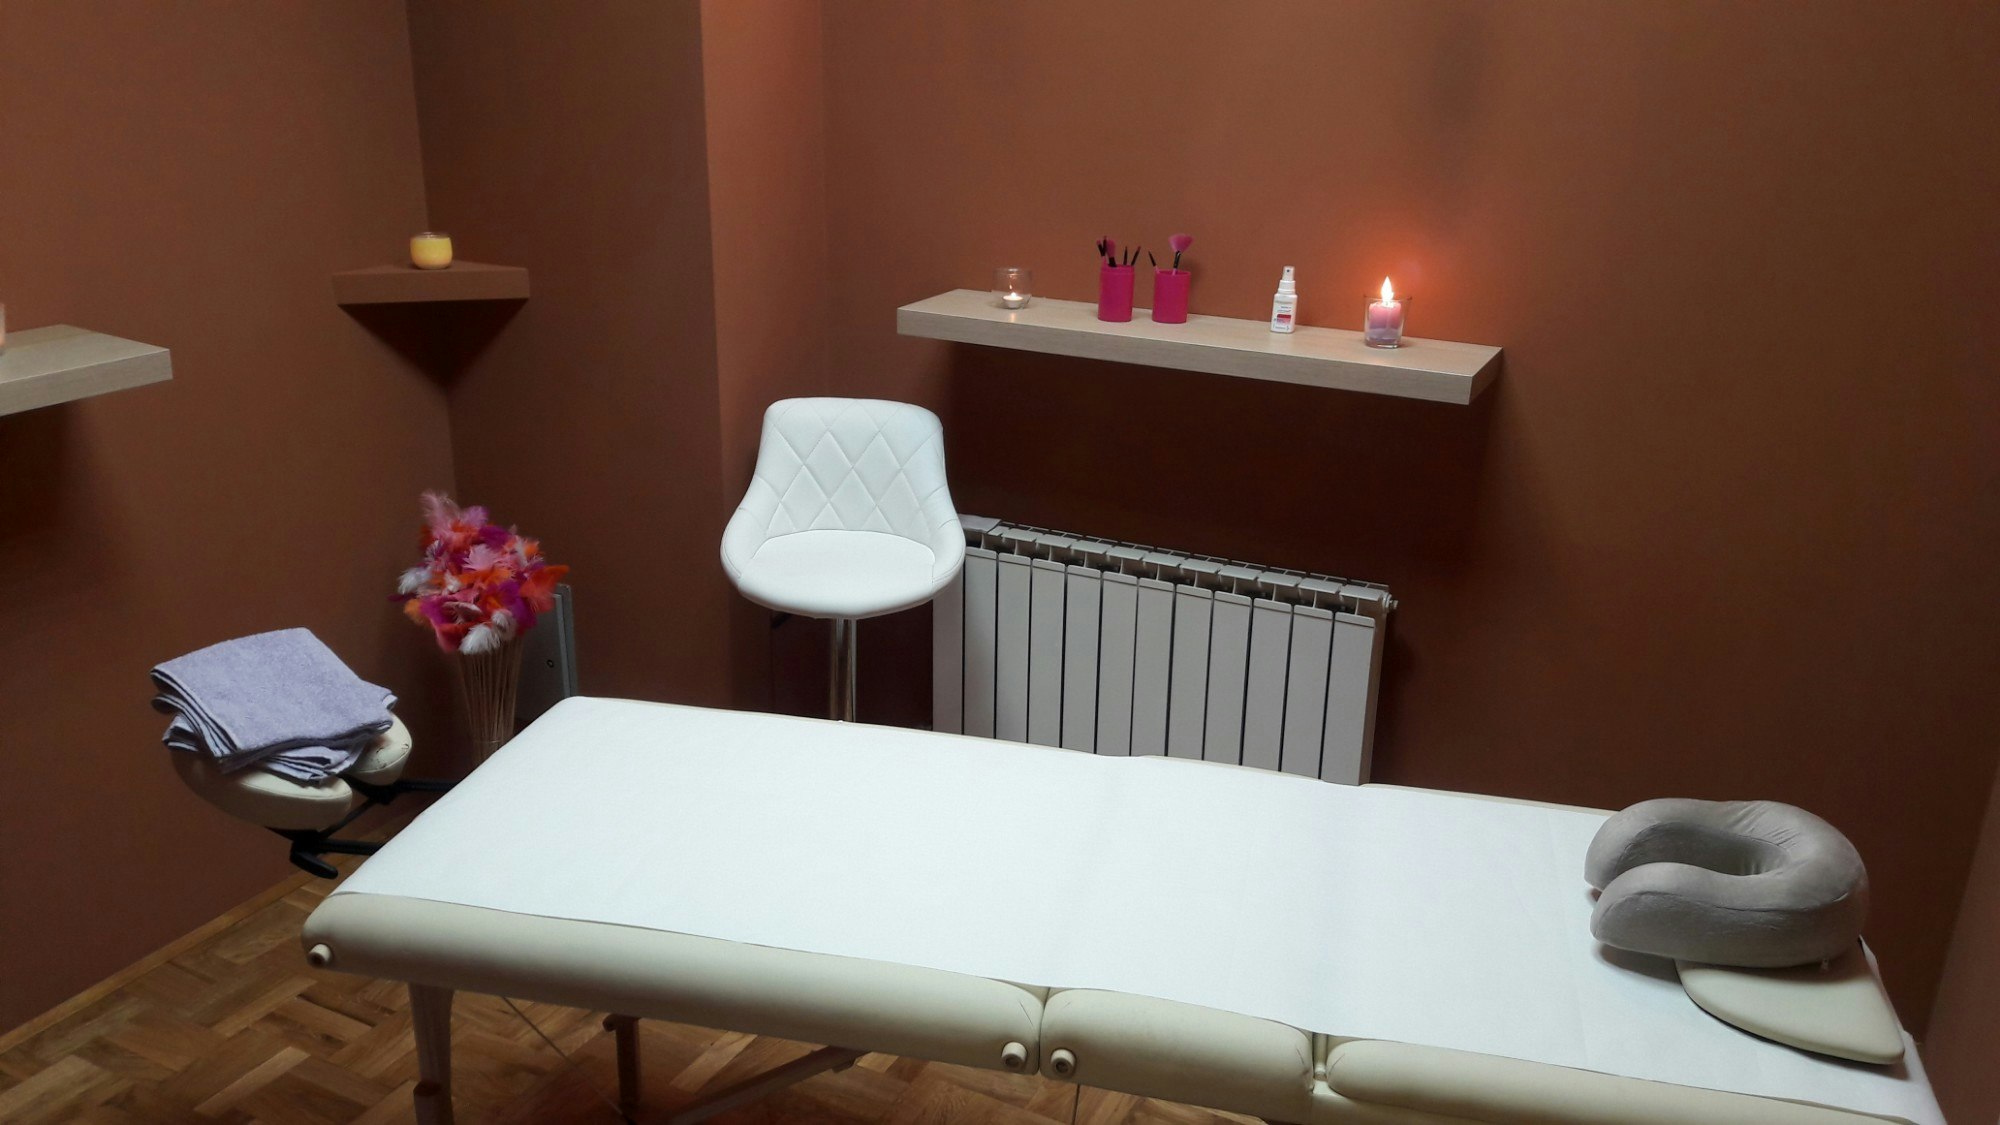 A massage table in a candlelit room.